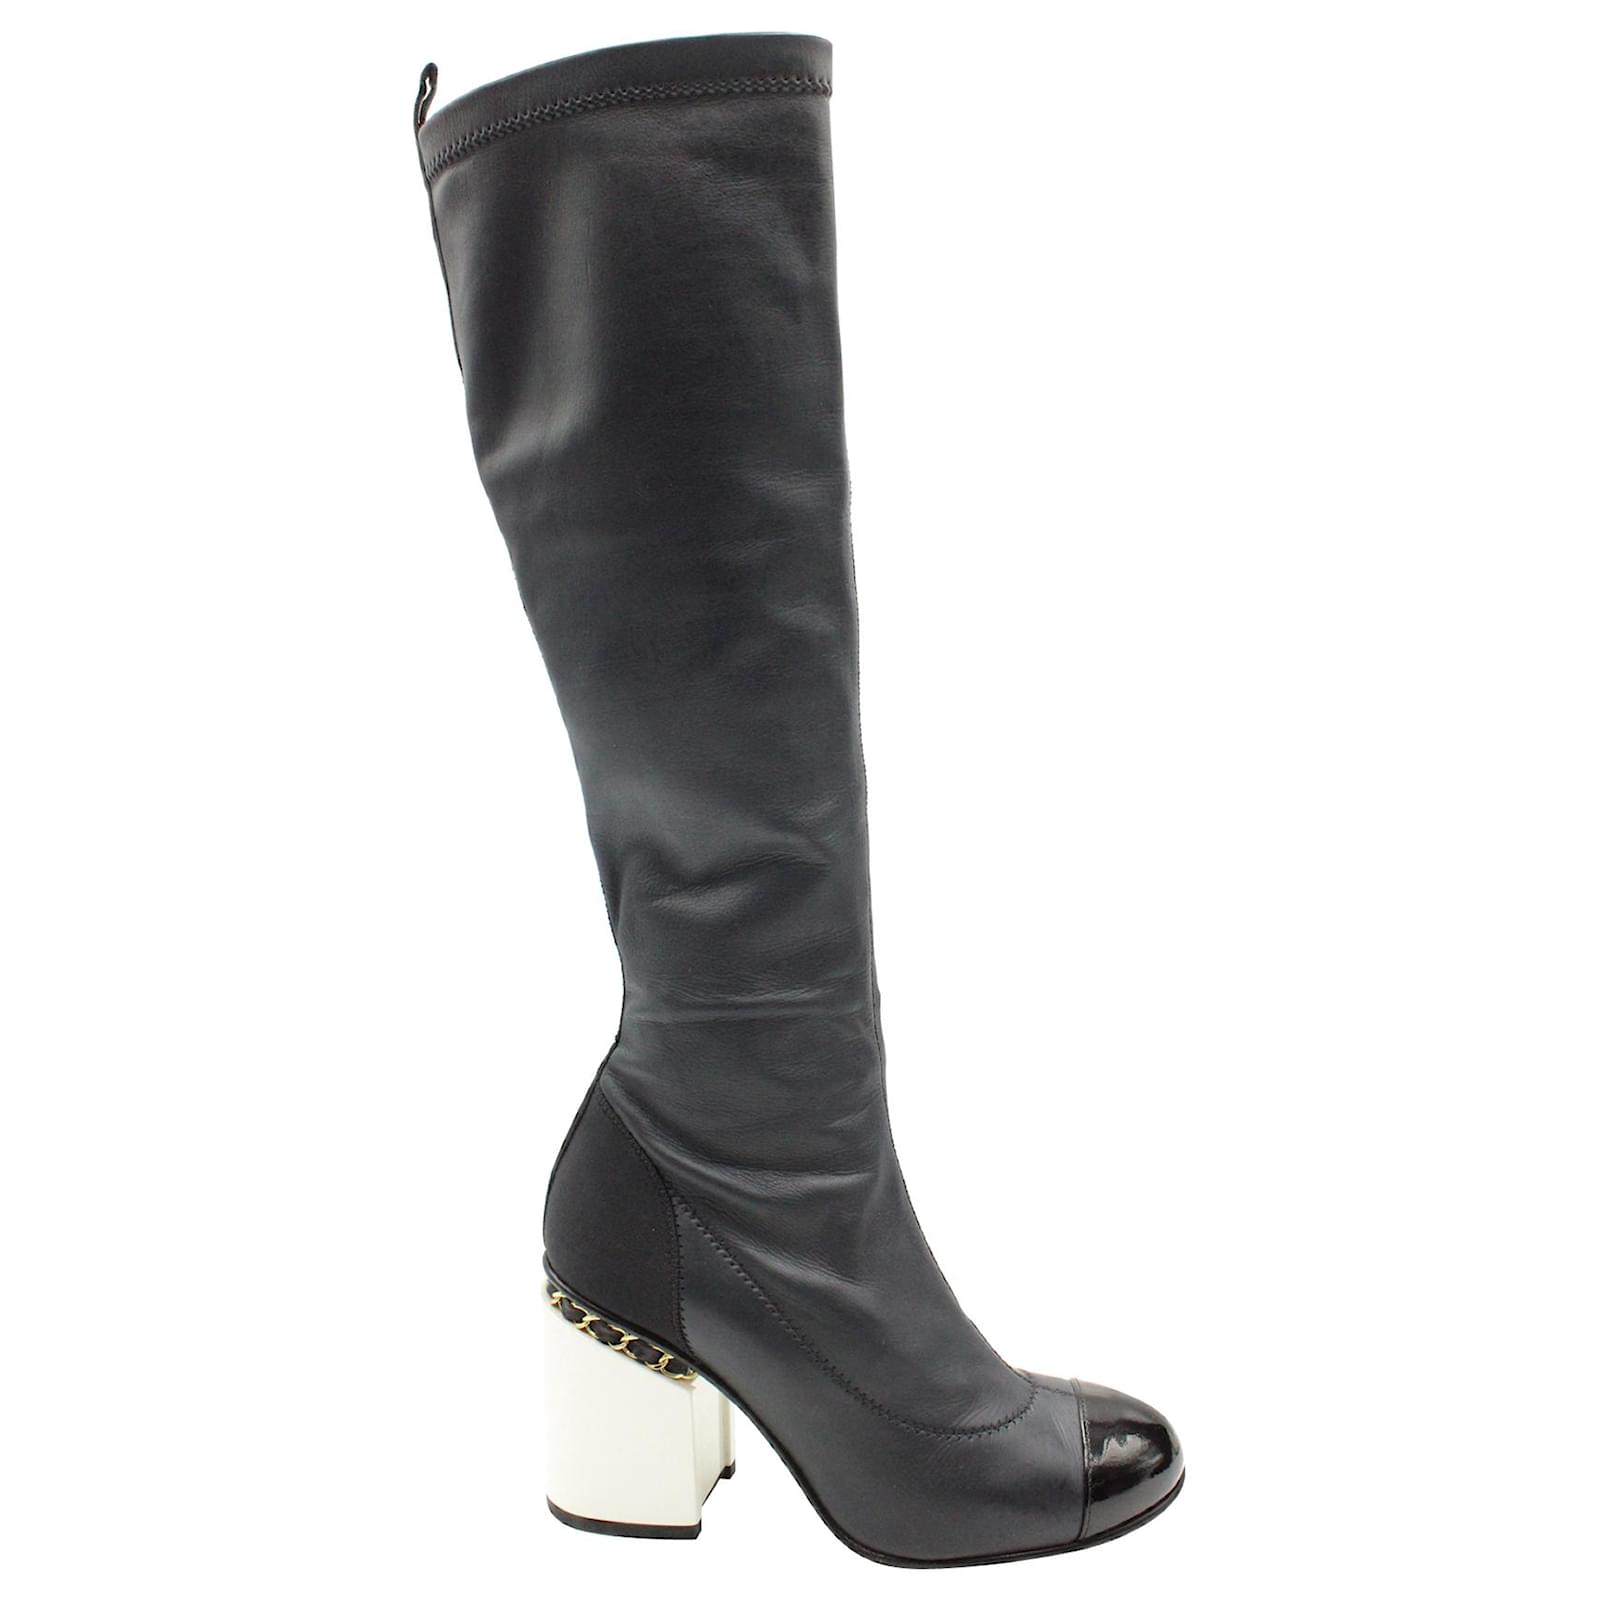 Ankle Boots Chanel Chanel Chain Detail Knee High Boots in Navy Blue Calfskin Leather